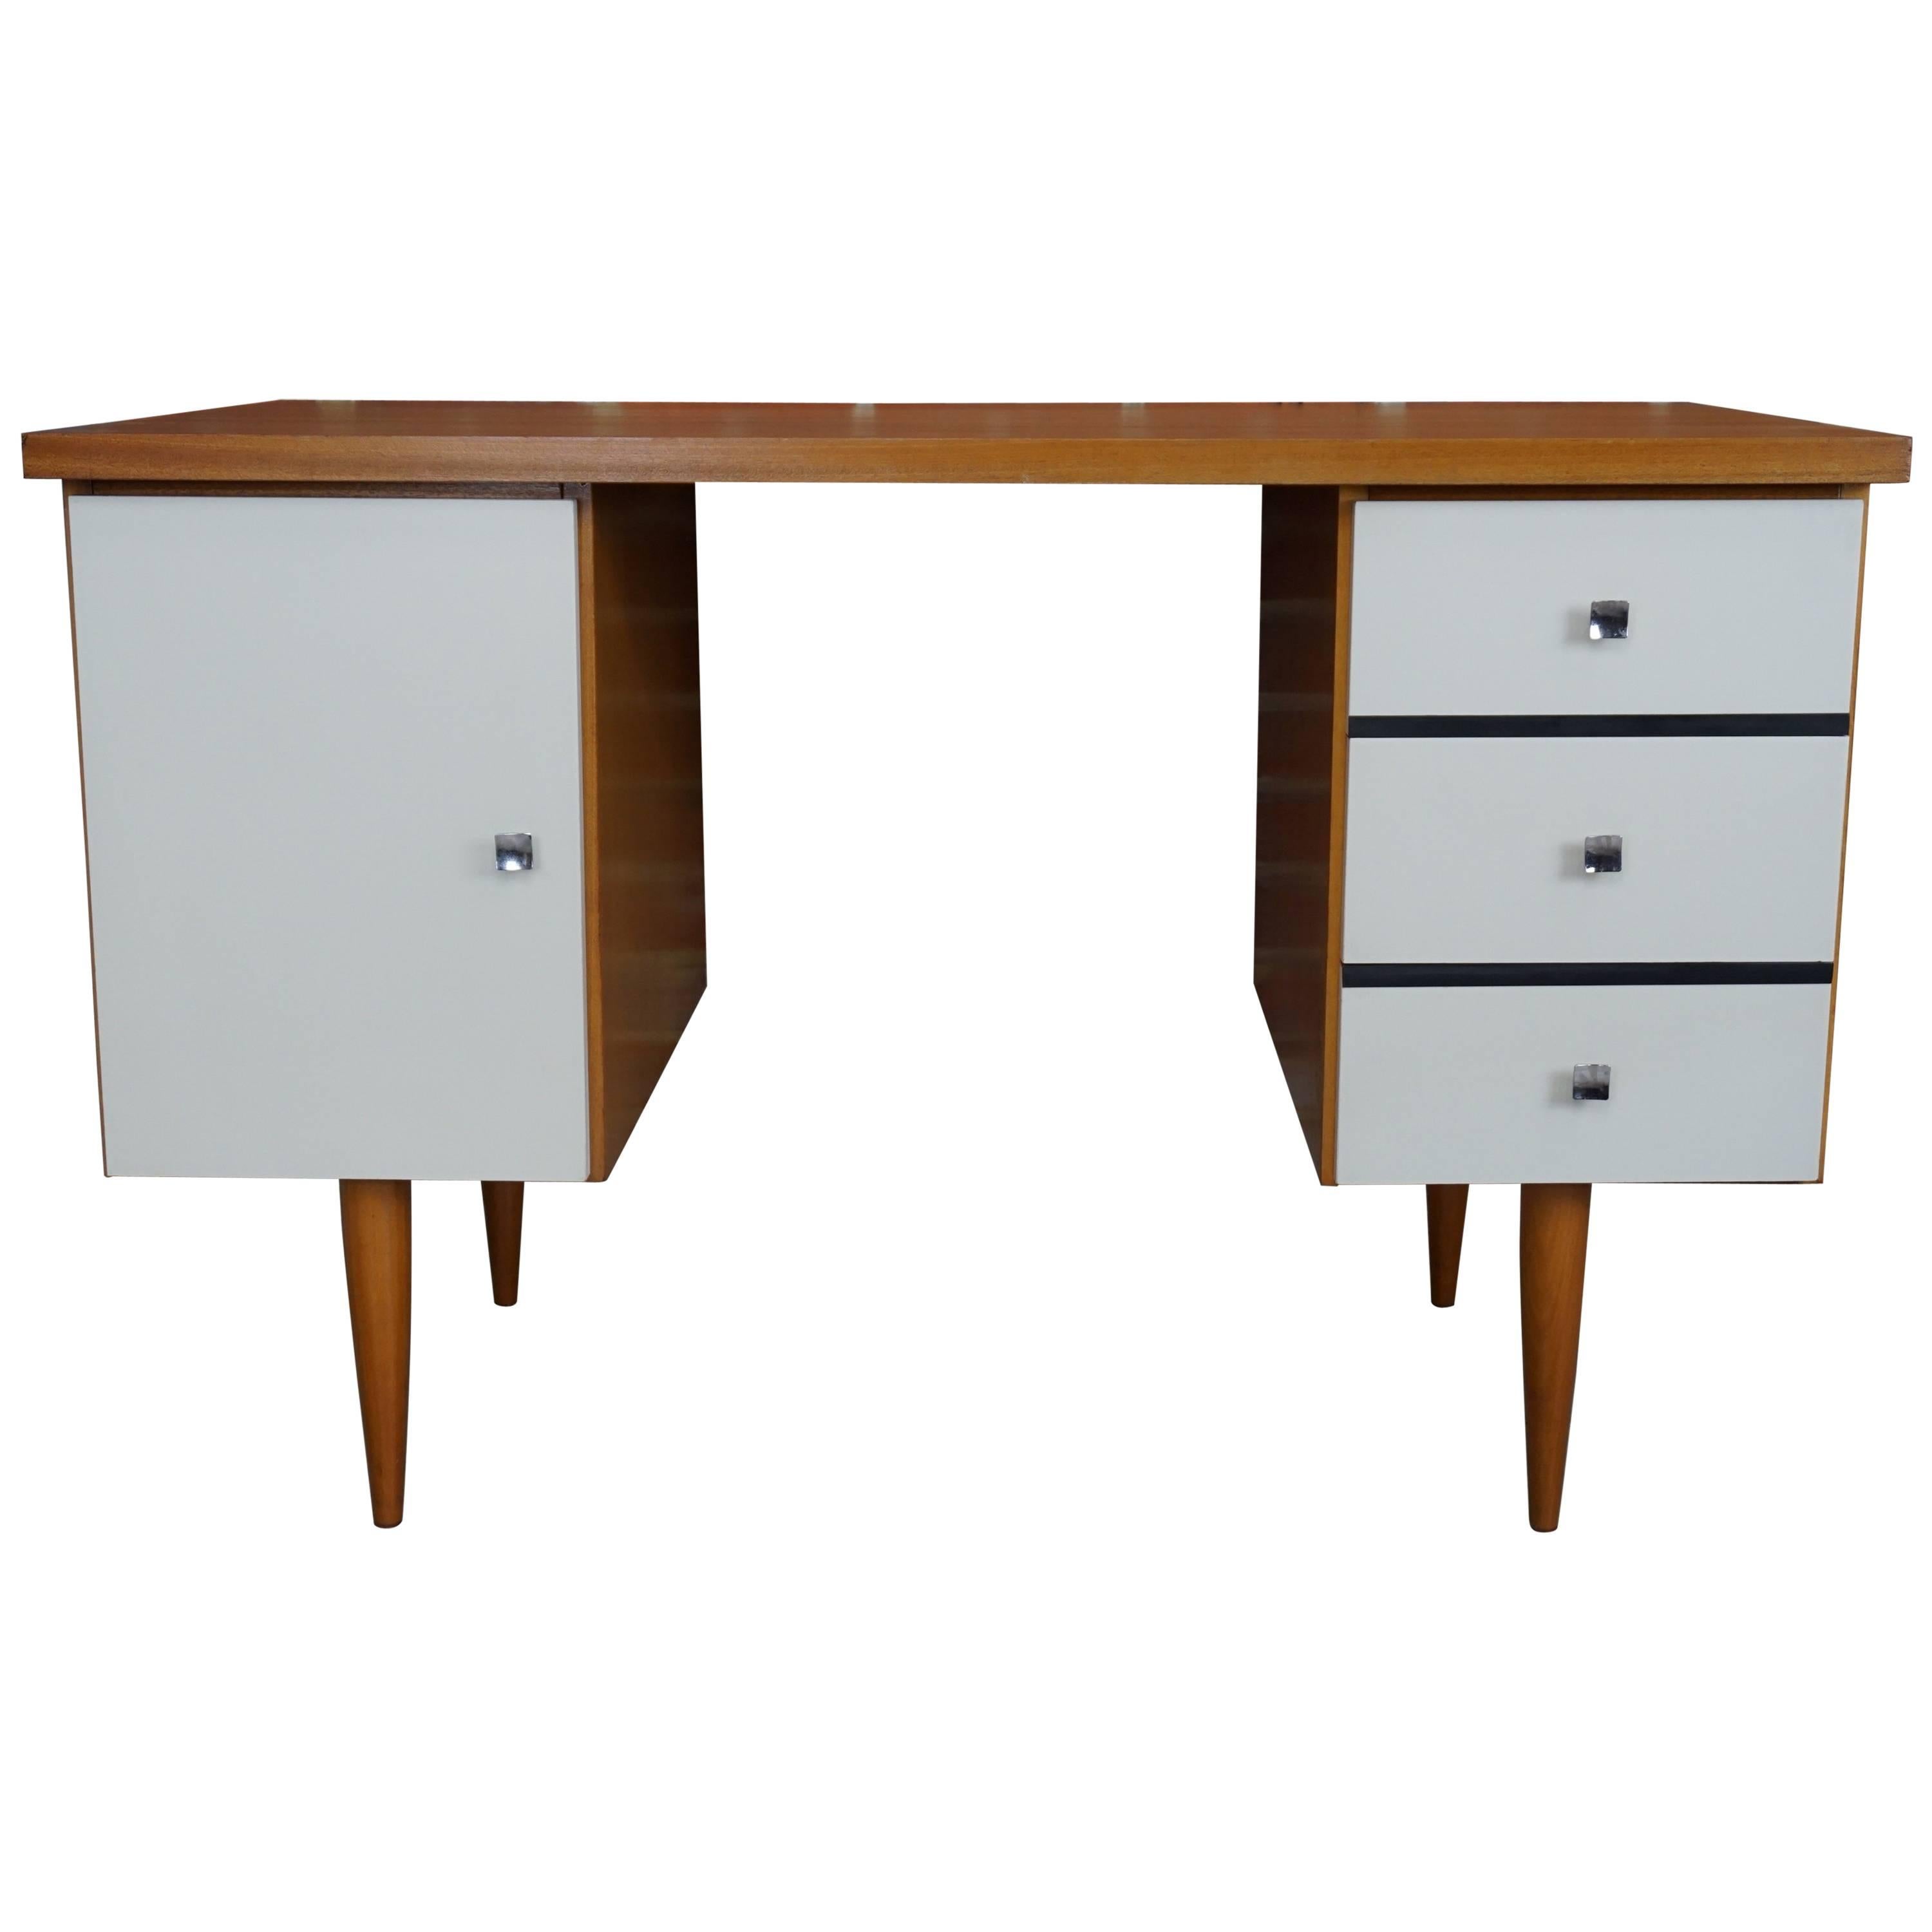 Wooden Teak and White Lacquer Desk Design from the 1960s